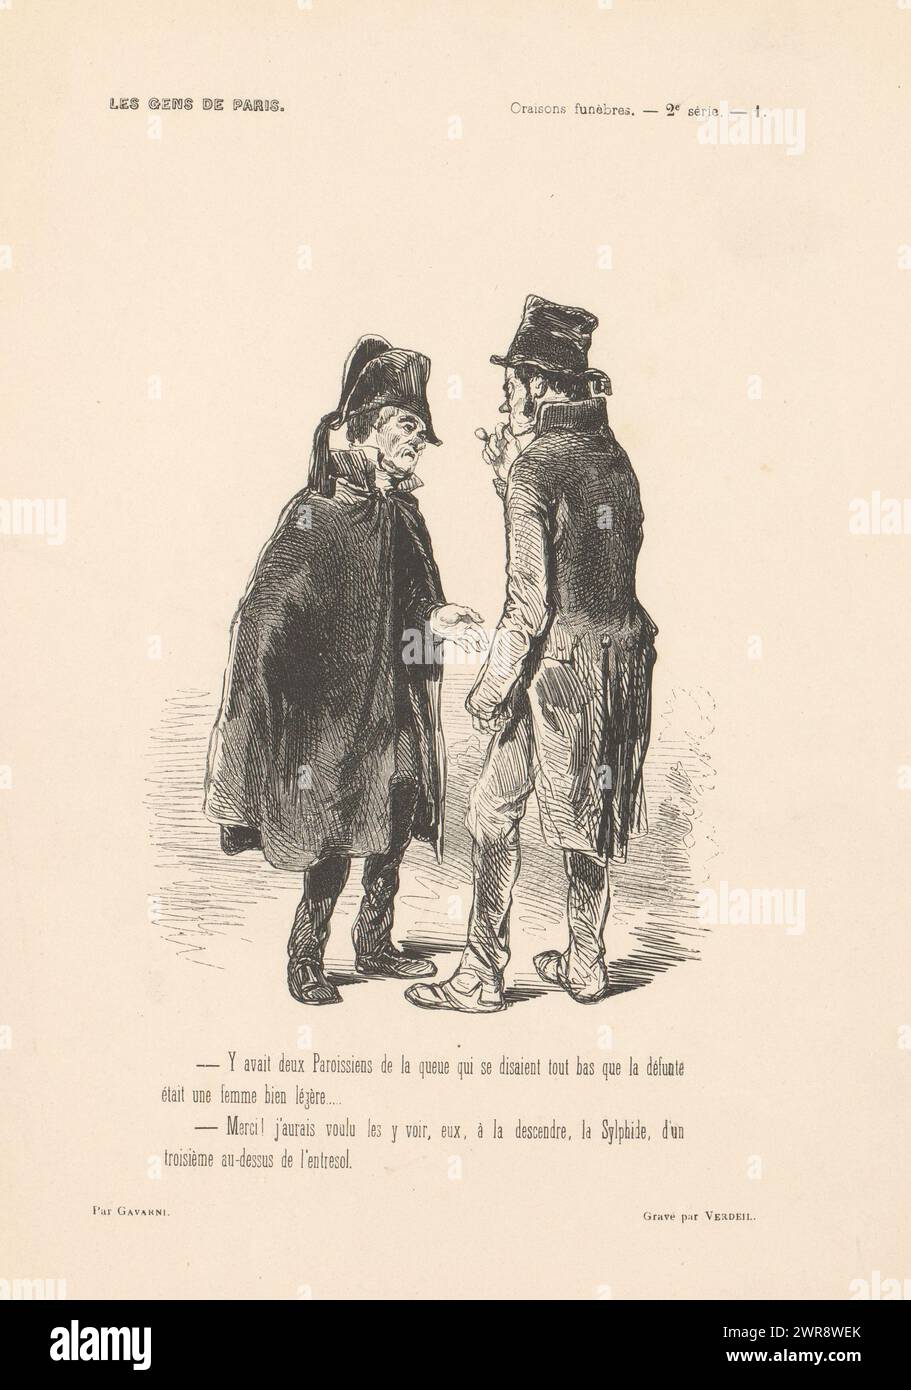 Two men in conversation, People from Paris (series title), Les gens de Paris (series title on object), Top right: Oraisons funébres. - 2nd series. - 1. With four-line caption in French., print maker: Pierre Verdeil, after design by: Paul Gavarni, France, 1846, paper, wood engraving, letterpress printing, height 277 mm × width 199 mm, print Stock Photo